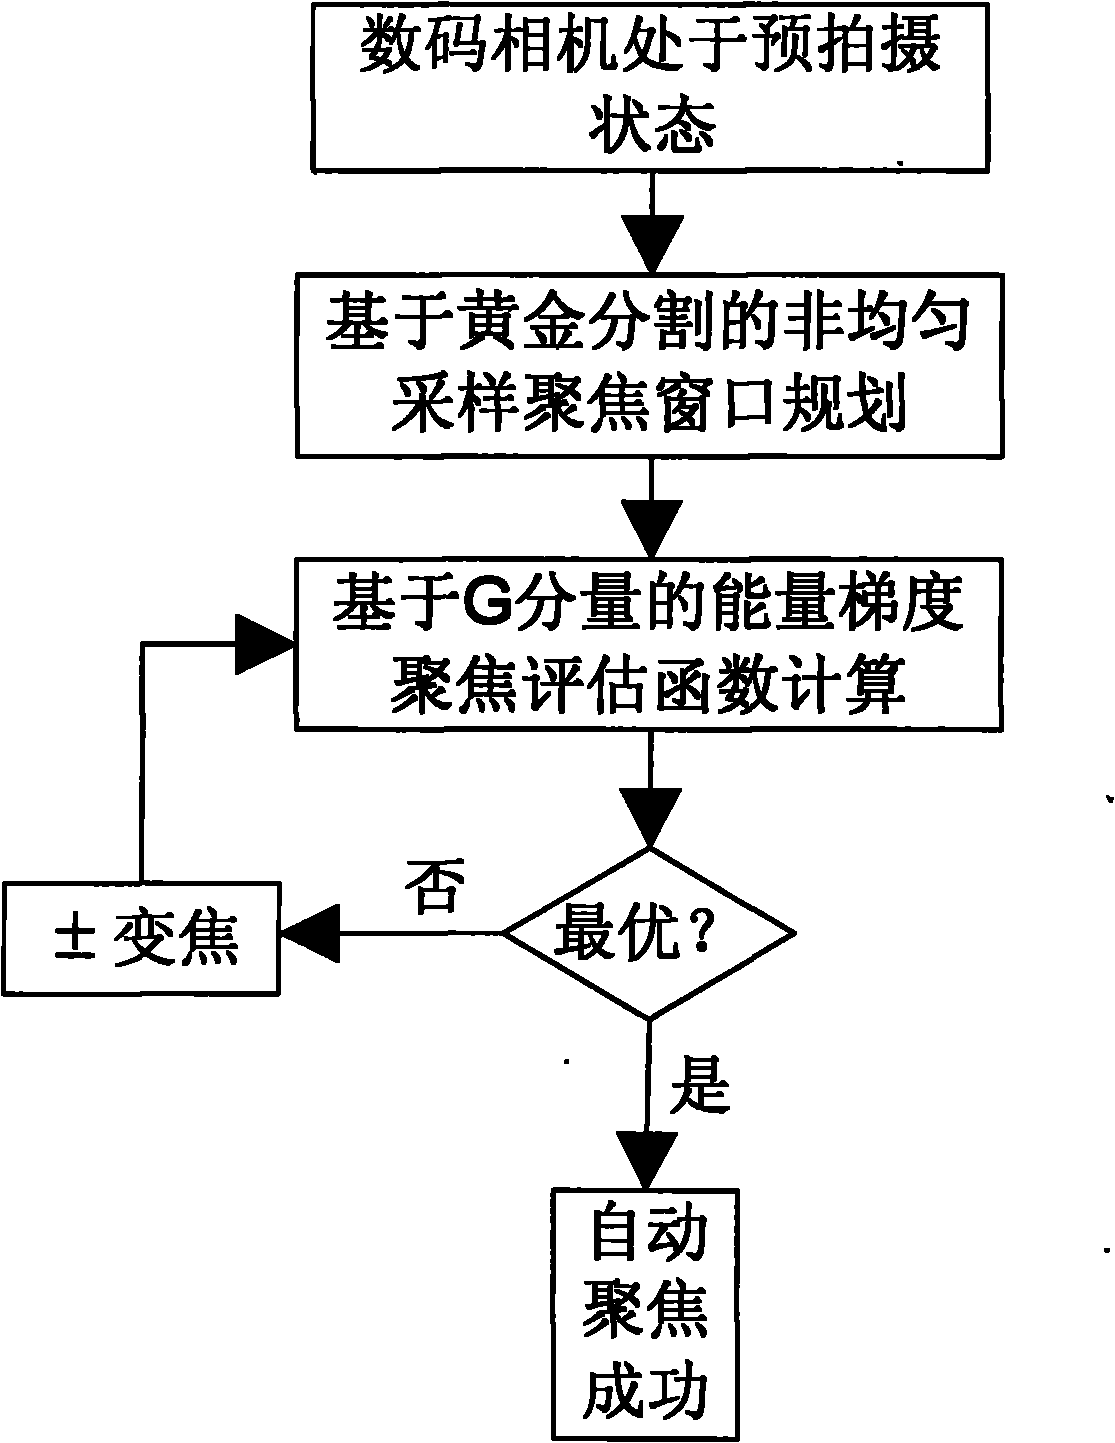 Automatic focusing system of digital camera for non-uniform sampling window planning based on golden section